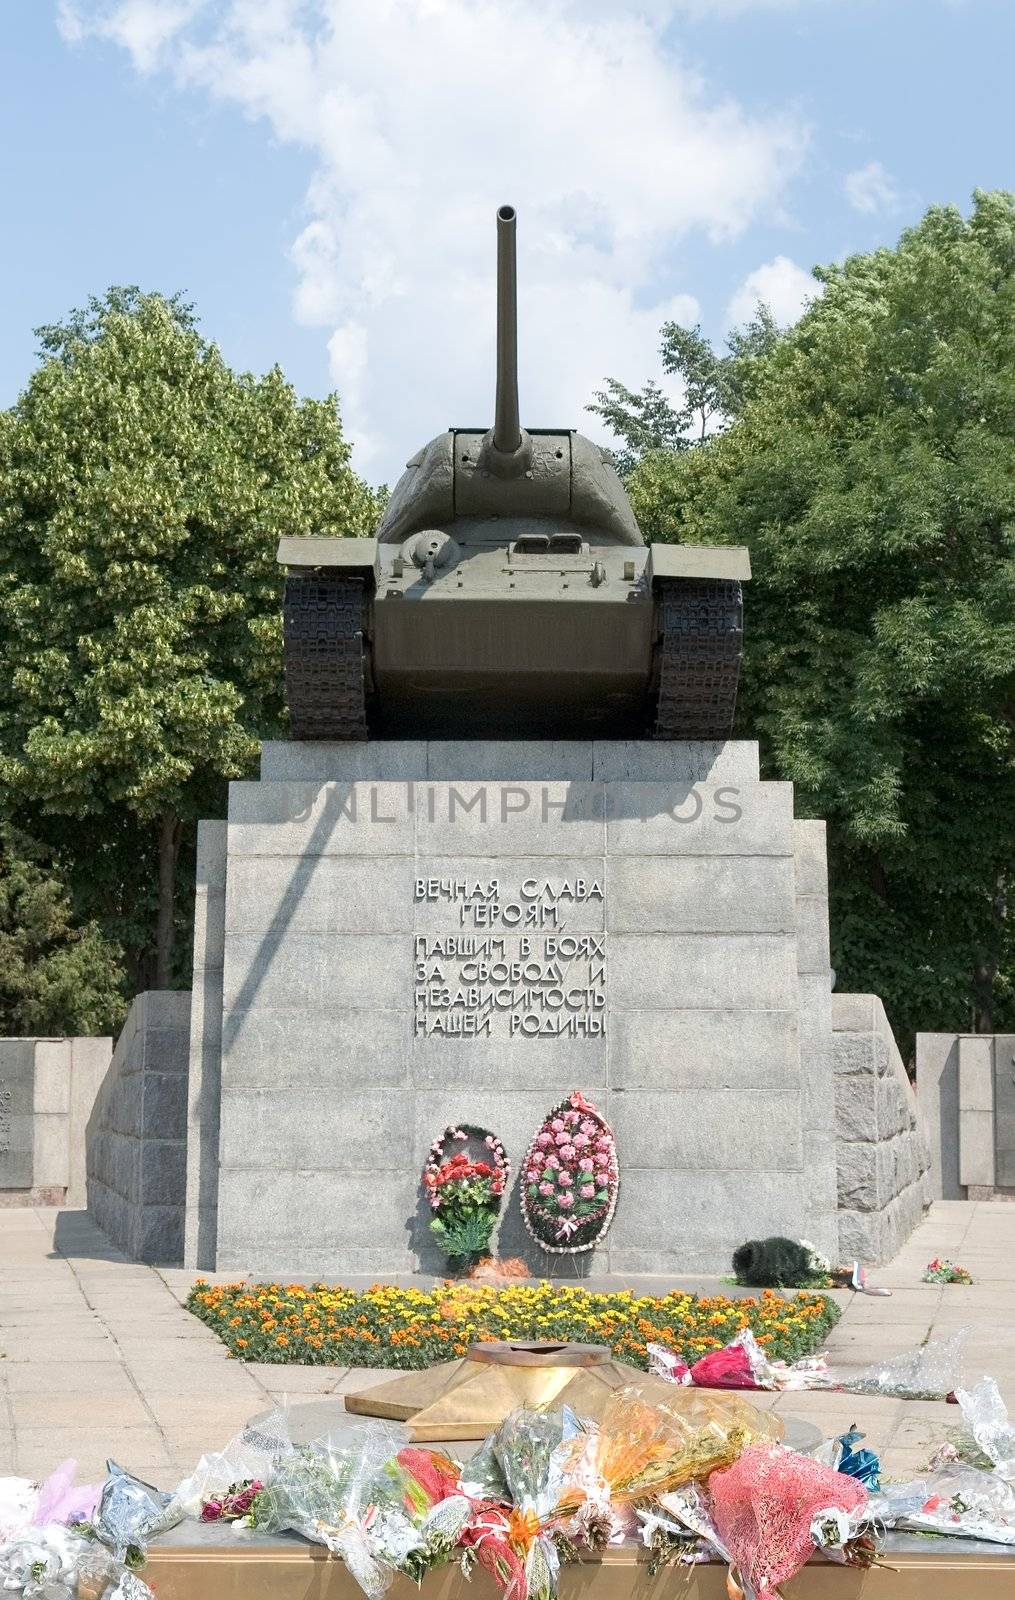 Tank on the pedestal. Monument to the tankers World War II.